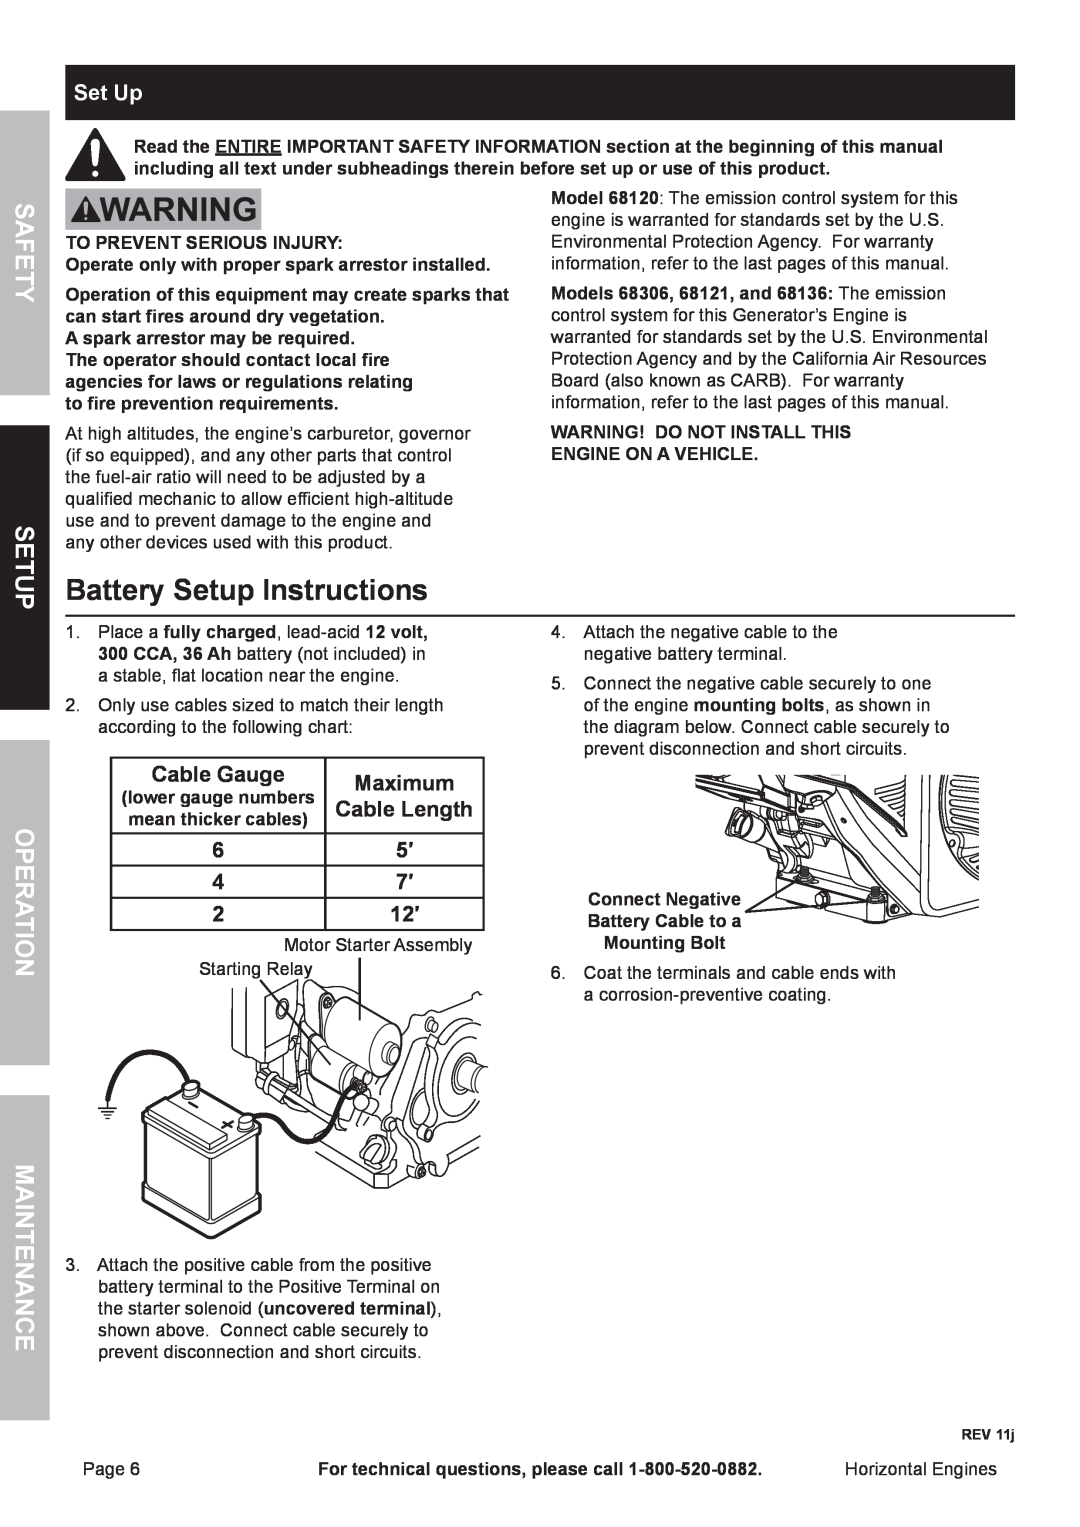 Harbor Freight Tools 68120 Battery Setup Instructions, Operation, Set Up, Cable Gauge, Maximum, Cable Length, Safety 